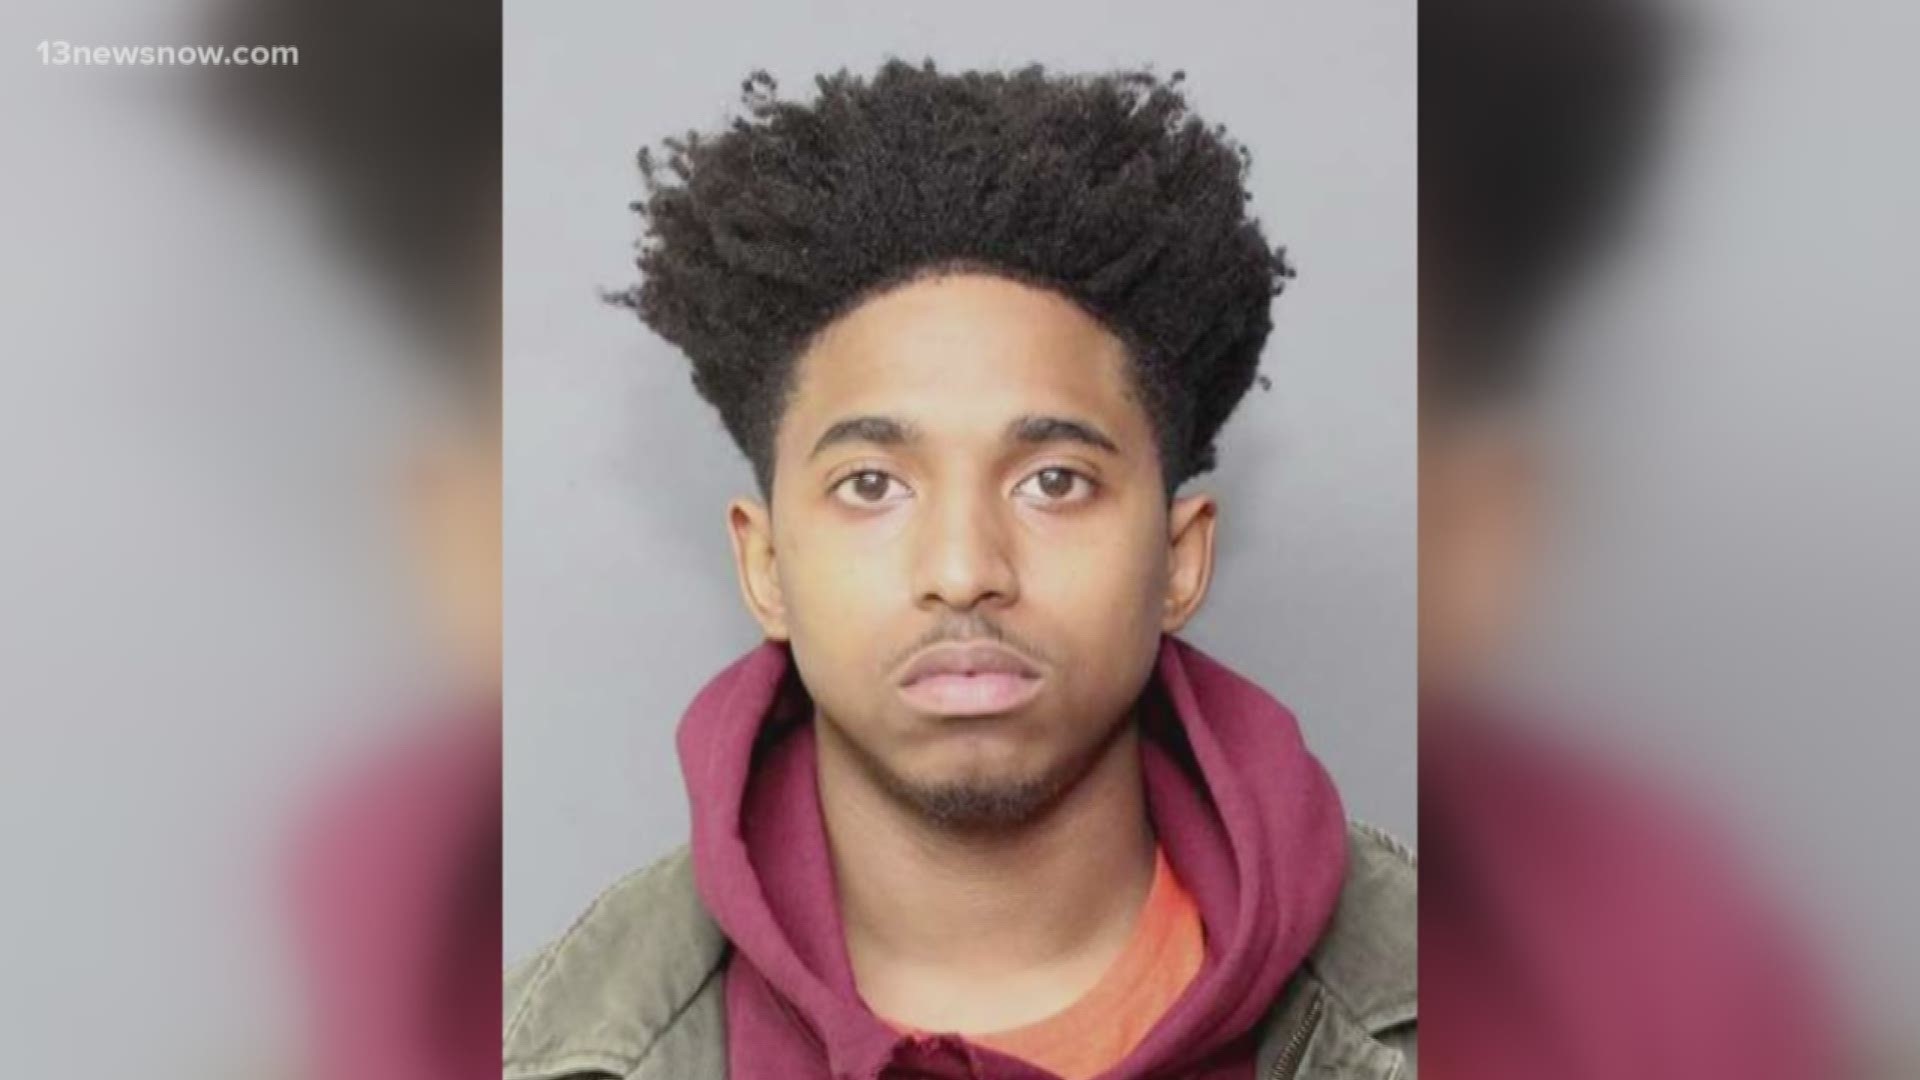 Kri'Shawn Beamon is accused of shooting and killing William & Mary football player Nate Evans in March. According to a witness, Evans was trying to sell a pound of weed to Beamon.